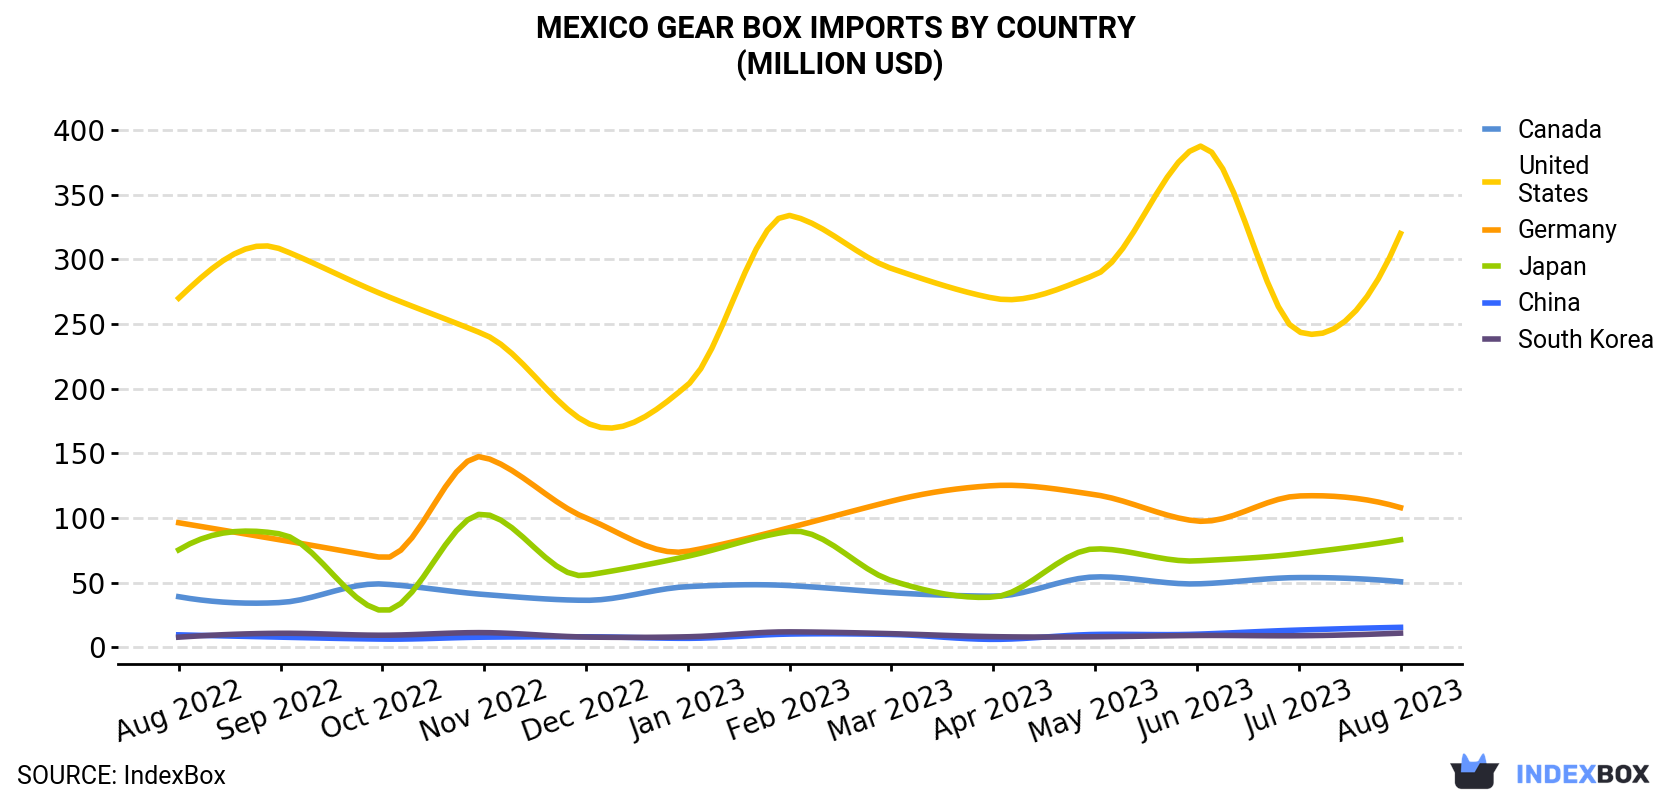 Mexico Gear Box Imports By Country (Million USD)